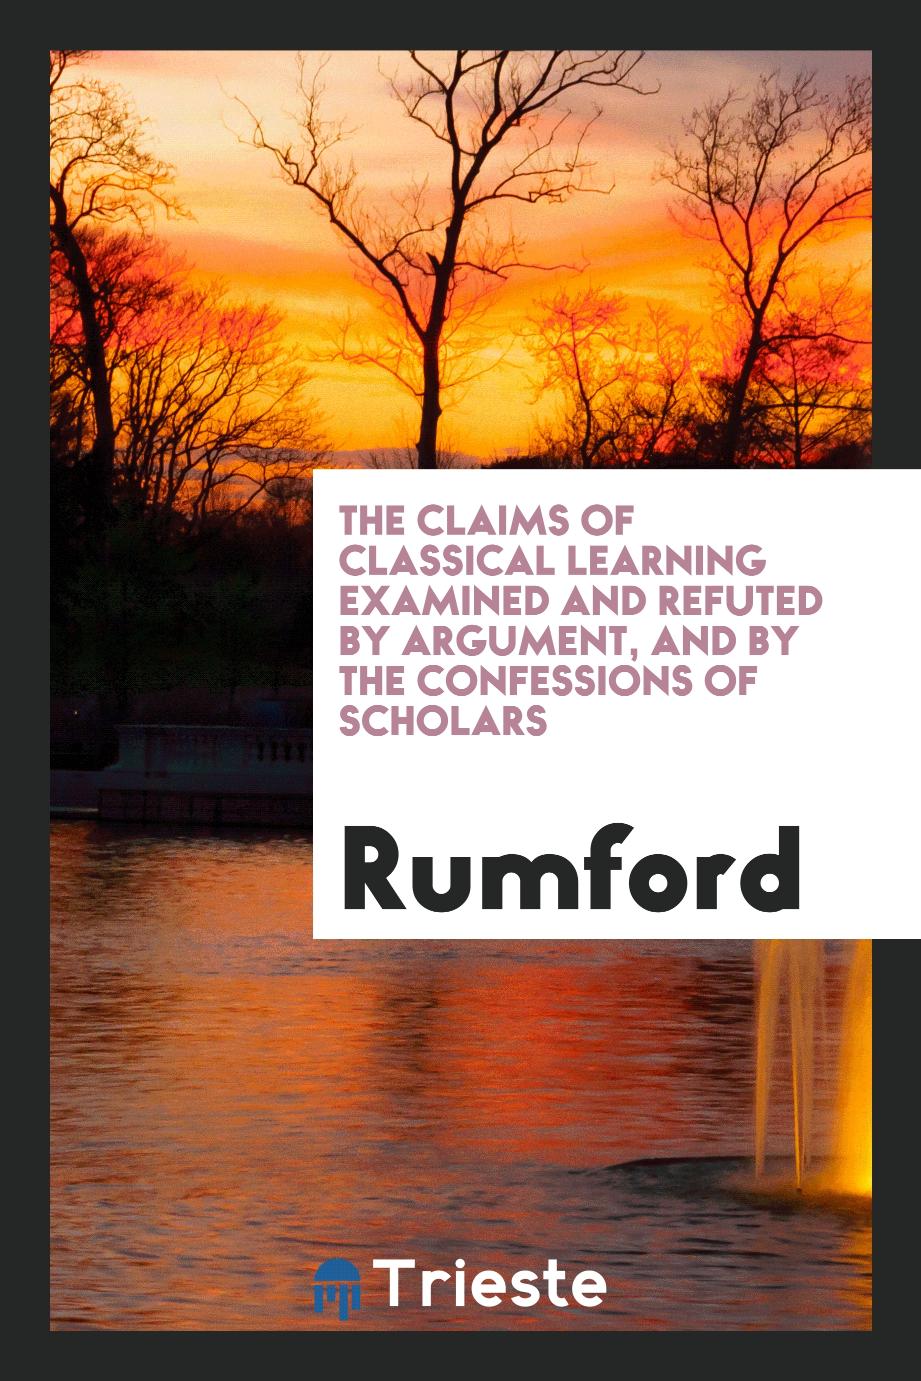 The Claims of Classical Learning Examined and Refuted by Argument, and by the Confessions of Scholars